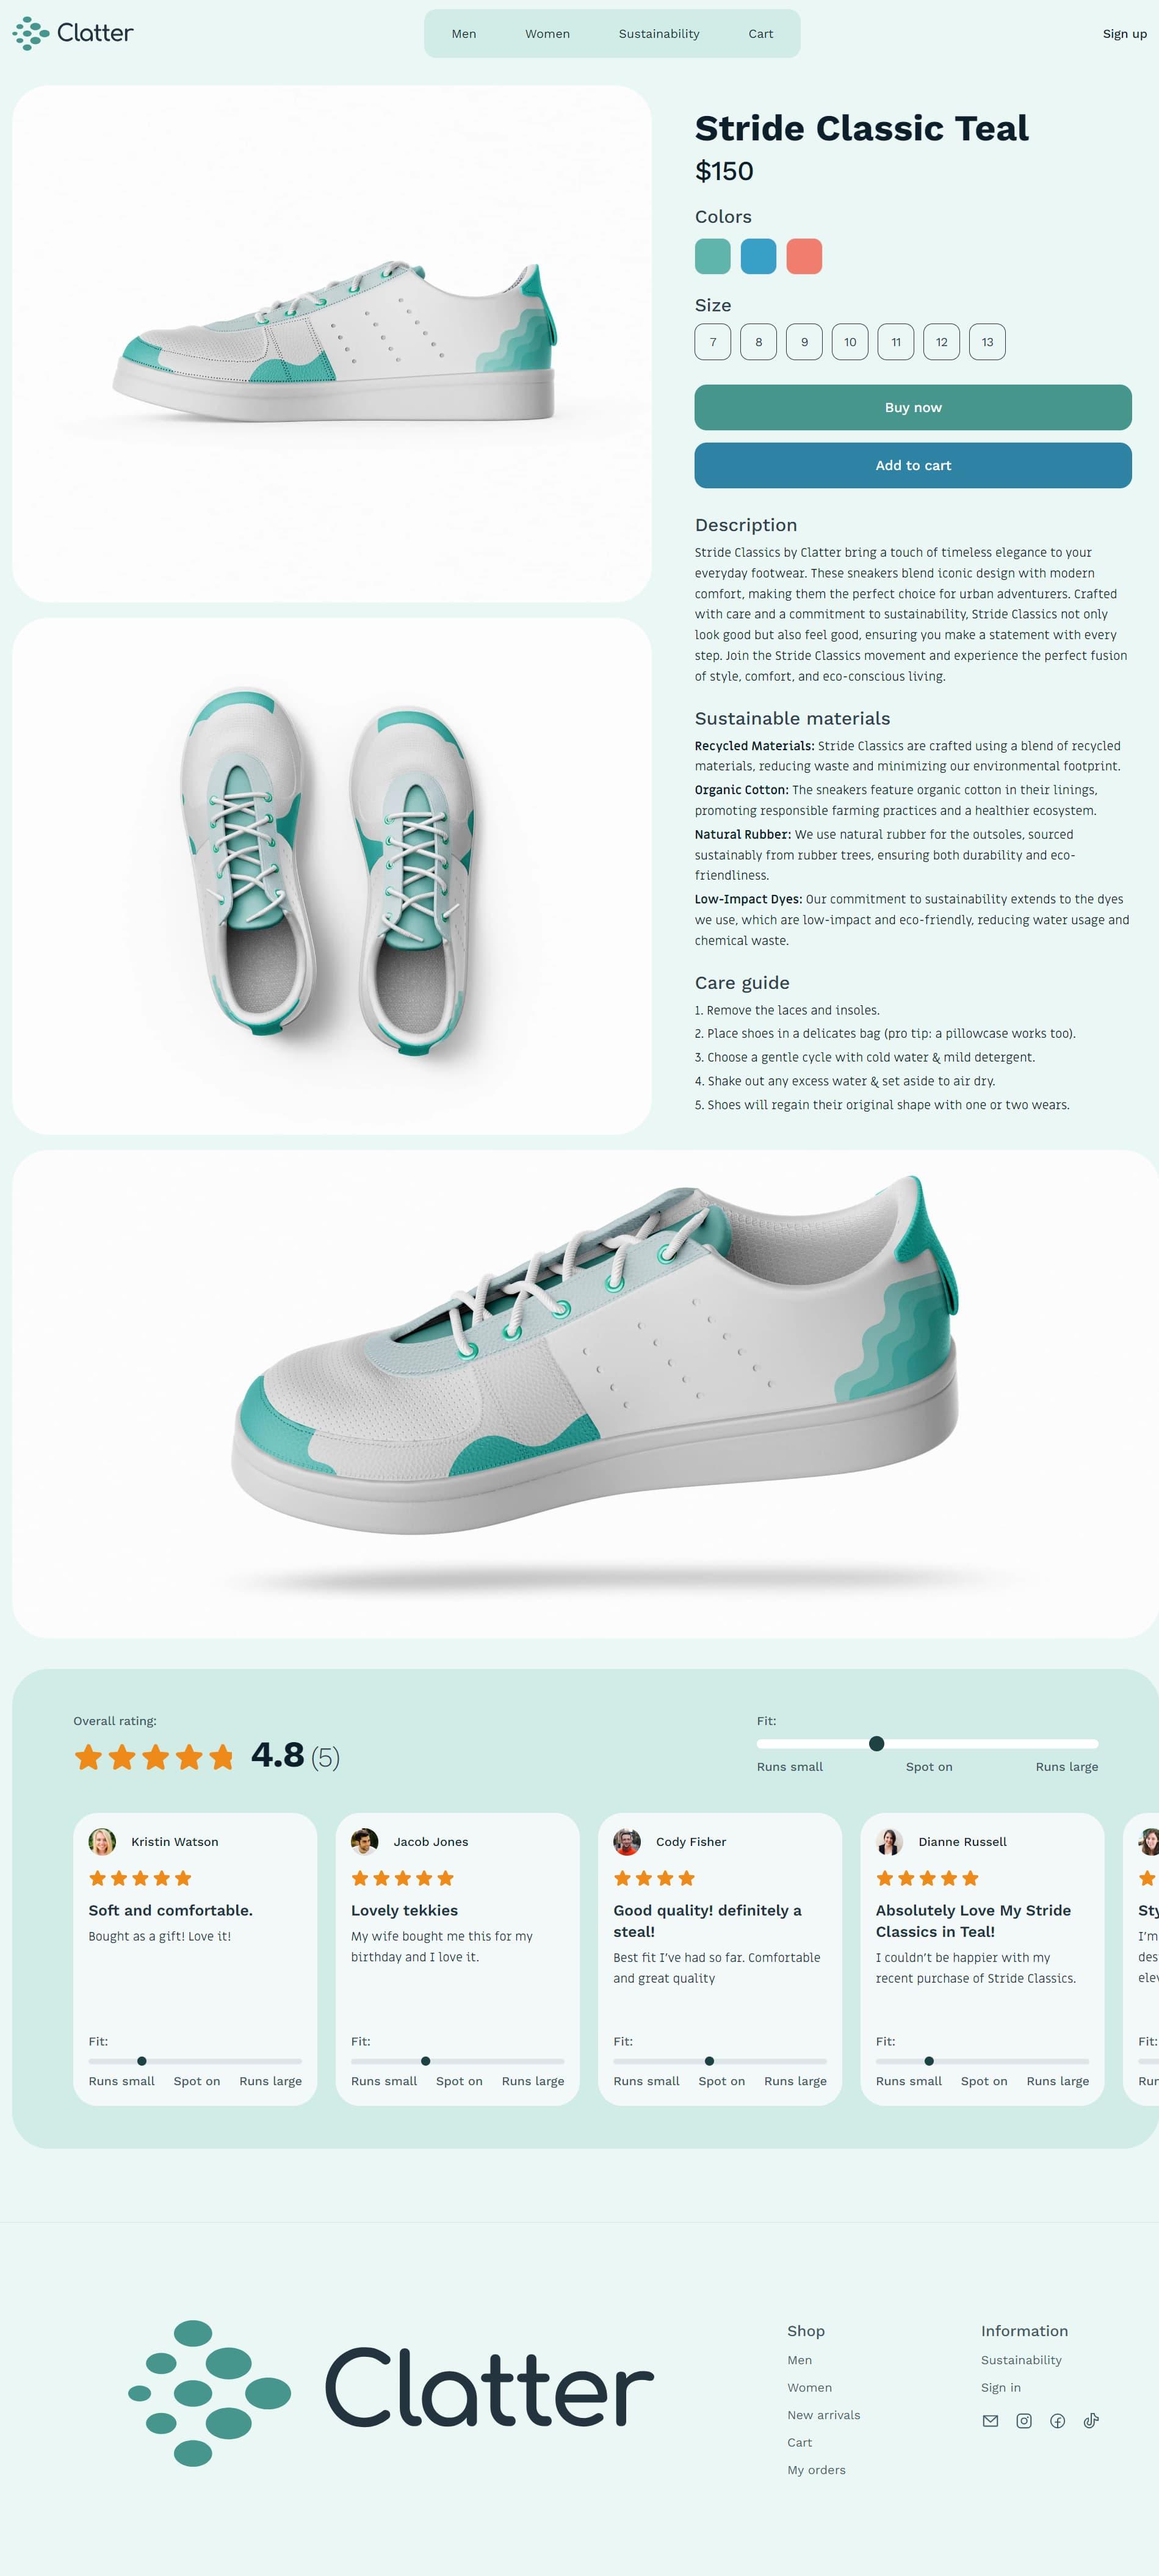 clatter-product-page.jpg